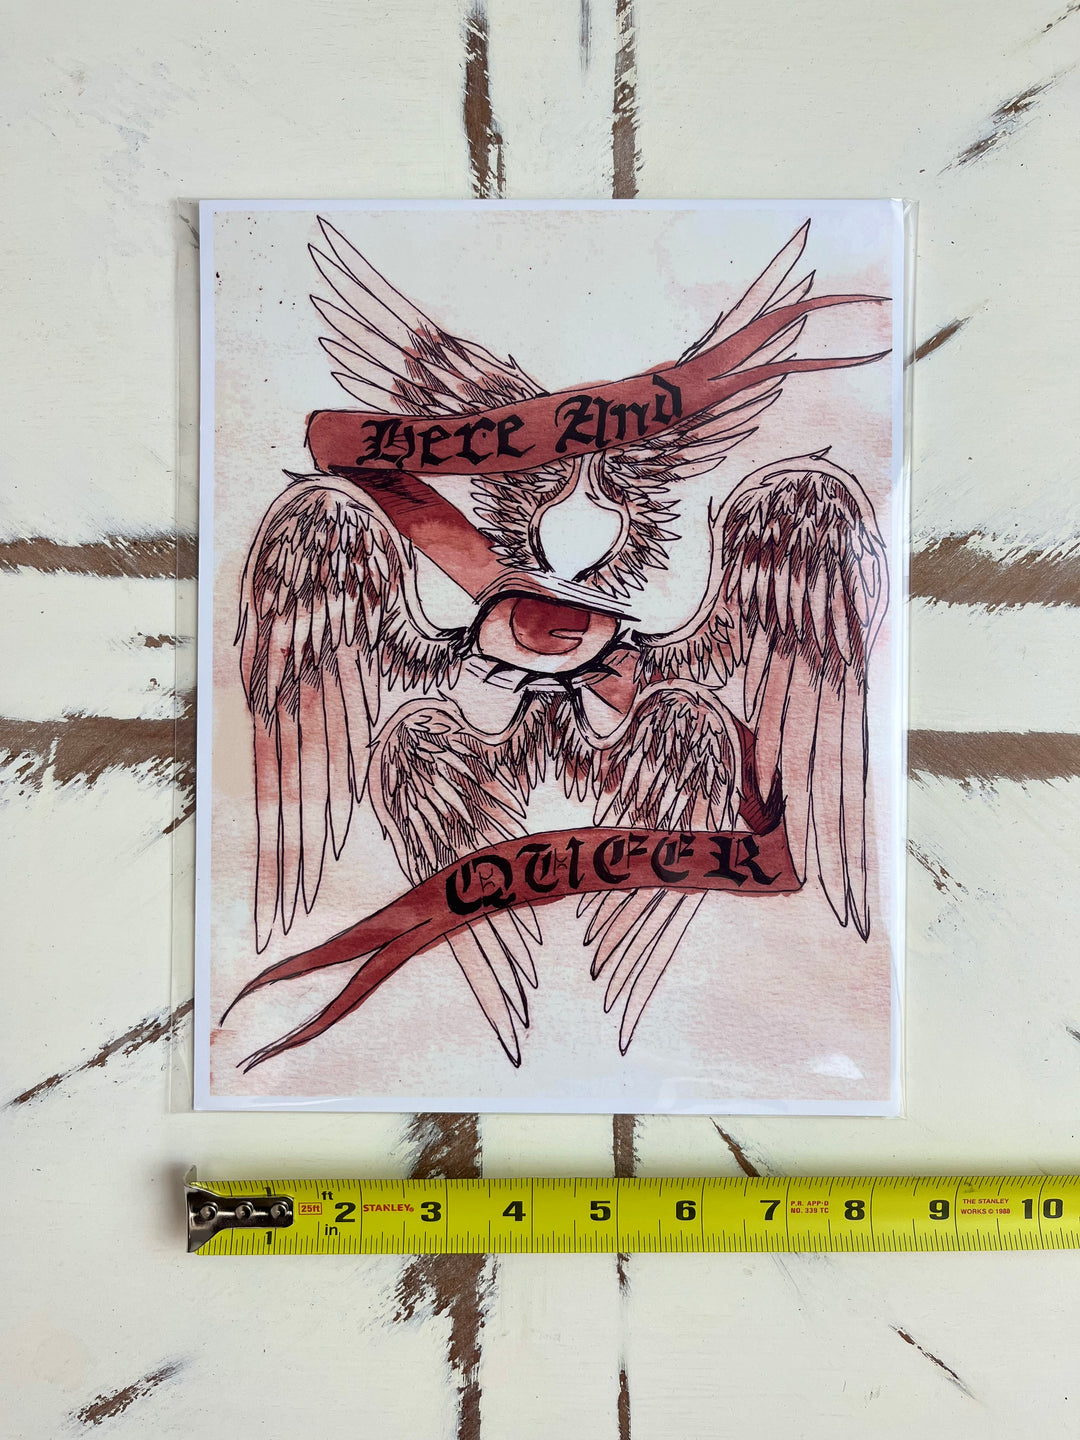 "HERE AND QUEER" SERAPHIM PRINT